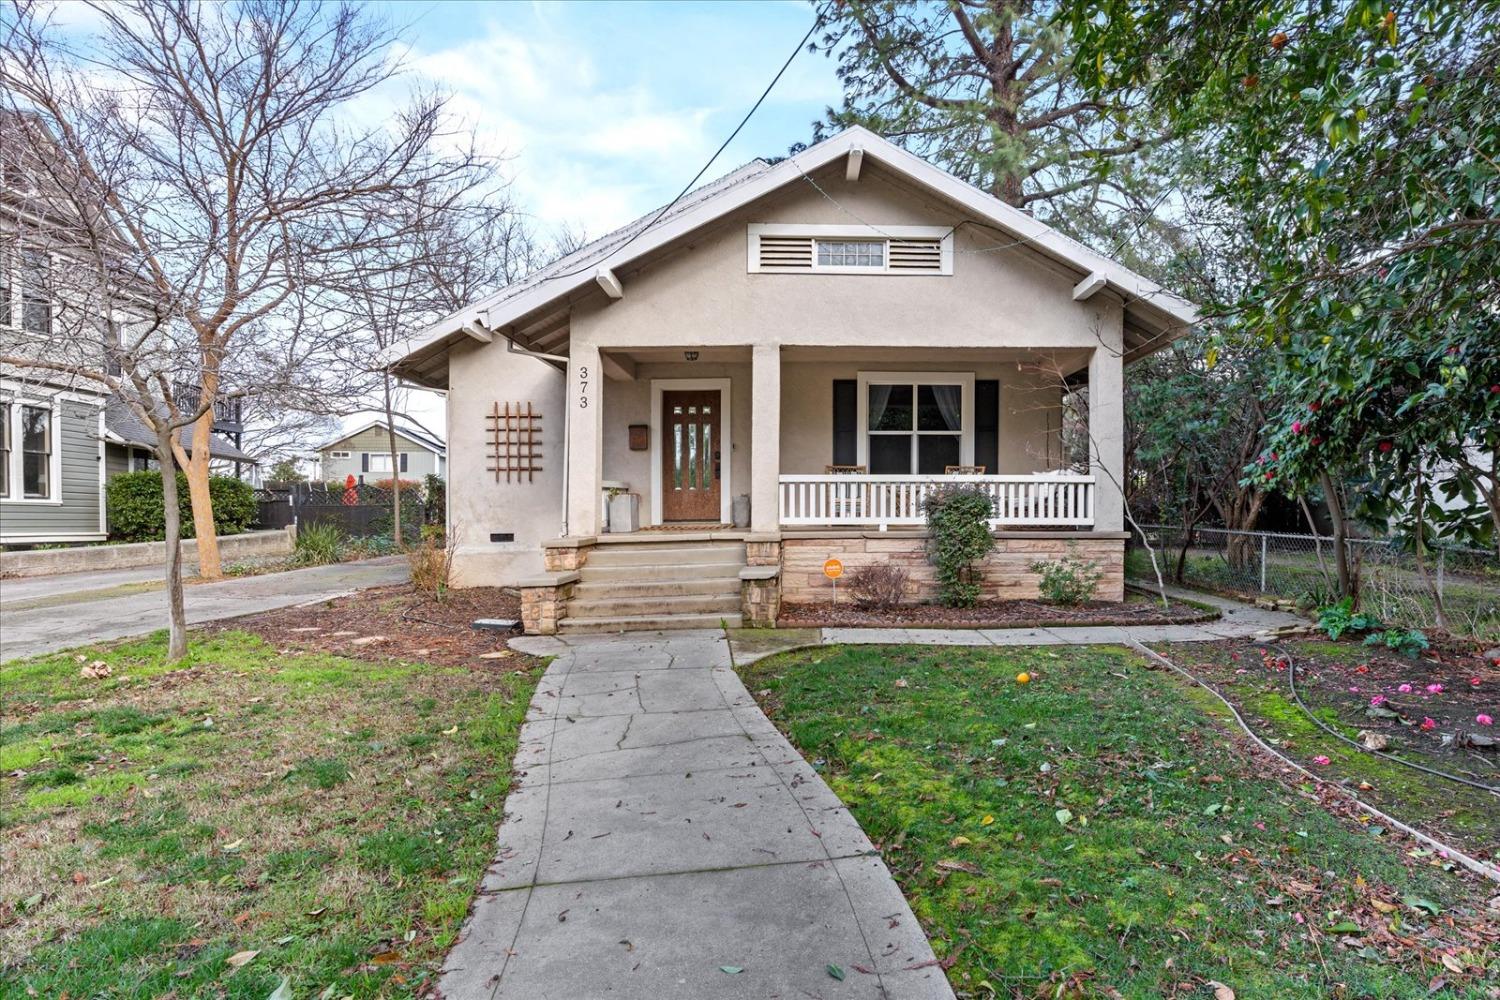 Photo of 373 2nd St in Yuba City, CA